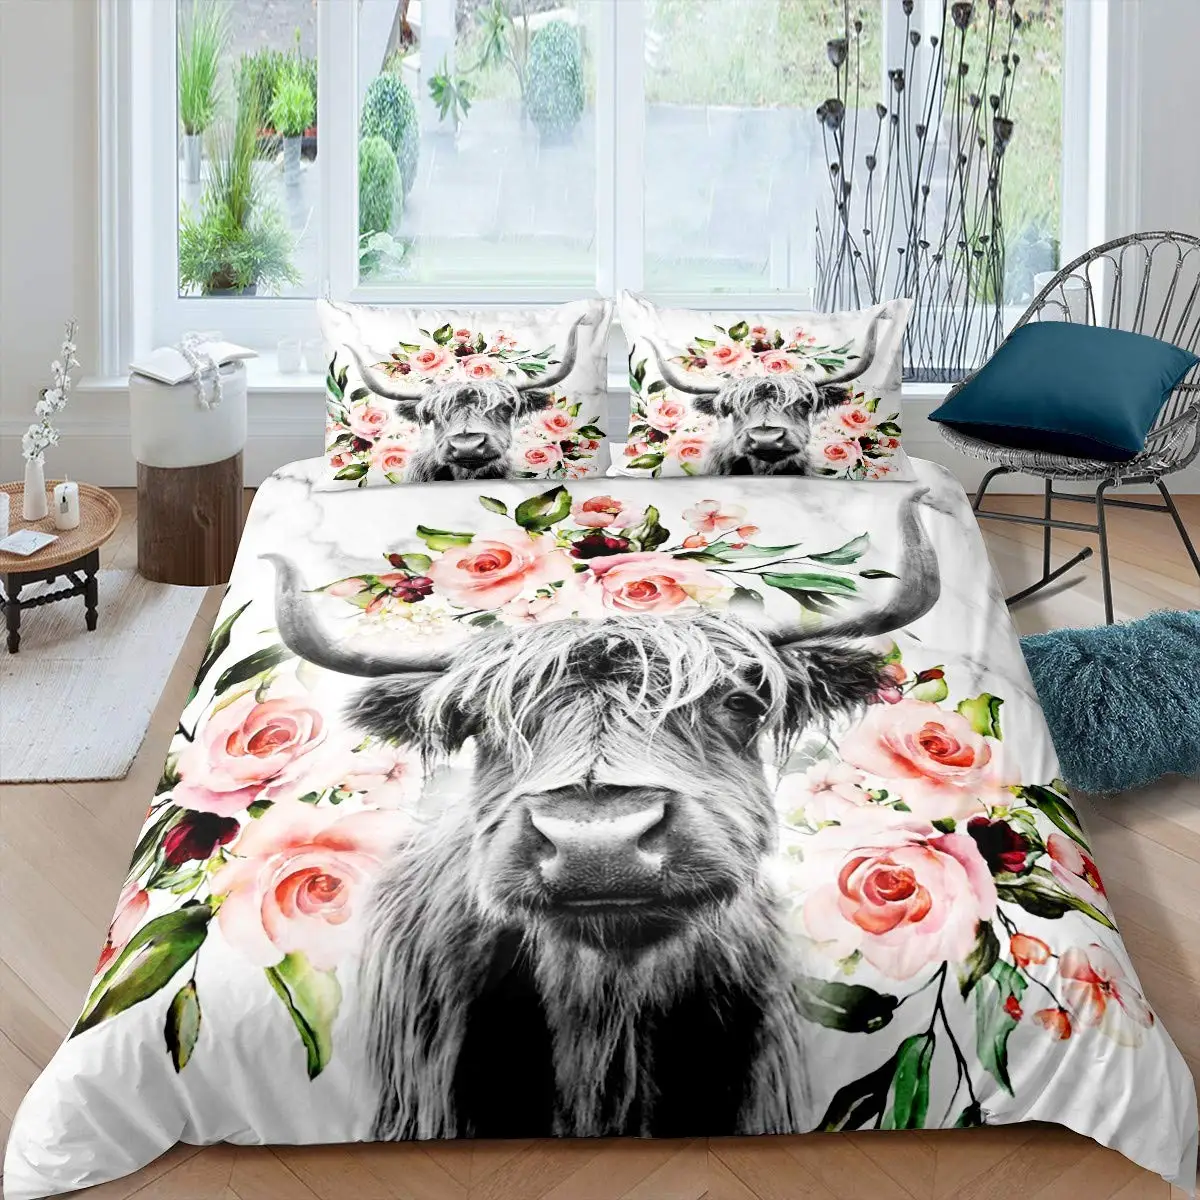 Highland Cow Duvet Cover Set 3D Print Animals Grass Polyester Comforter Cover King Queen Twin Full Size for Kids Boy Girl Teen